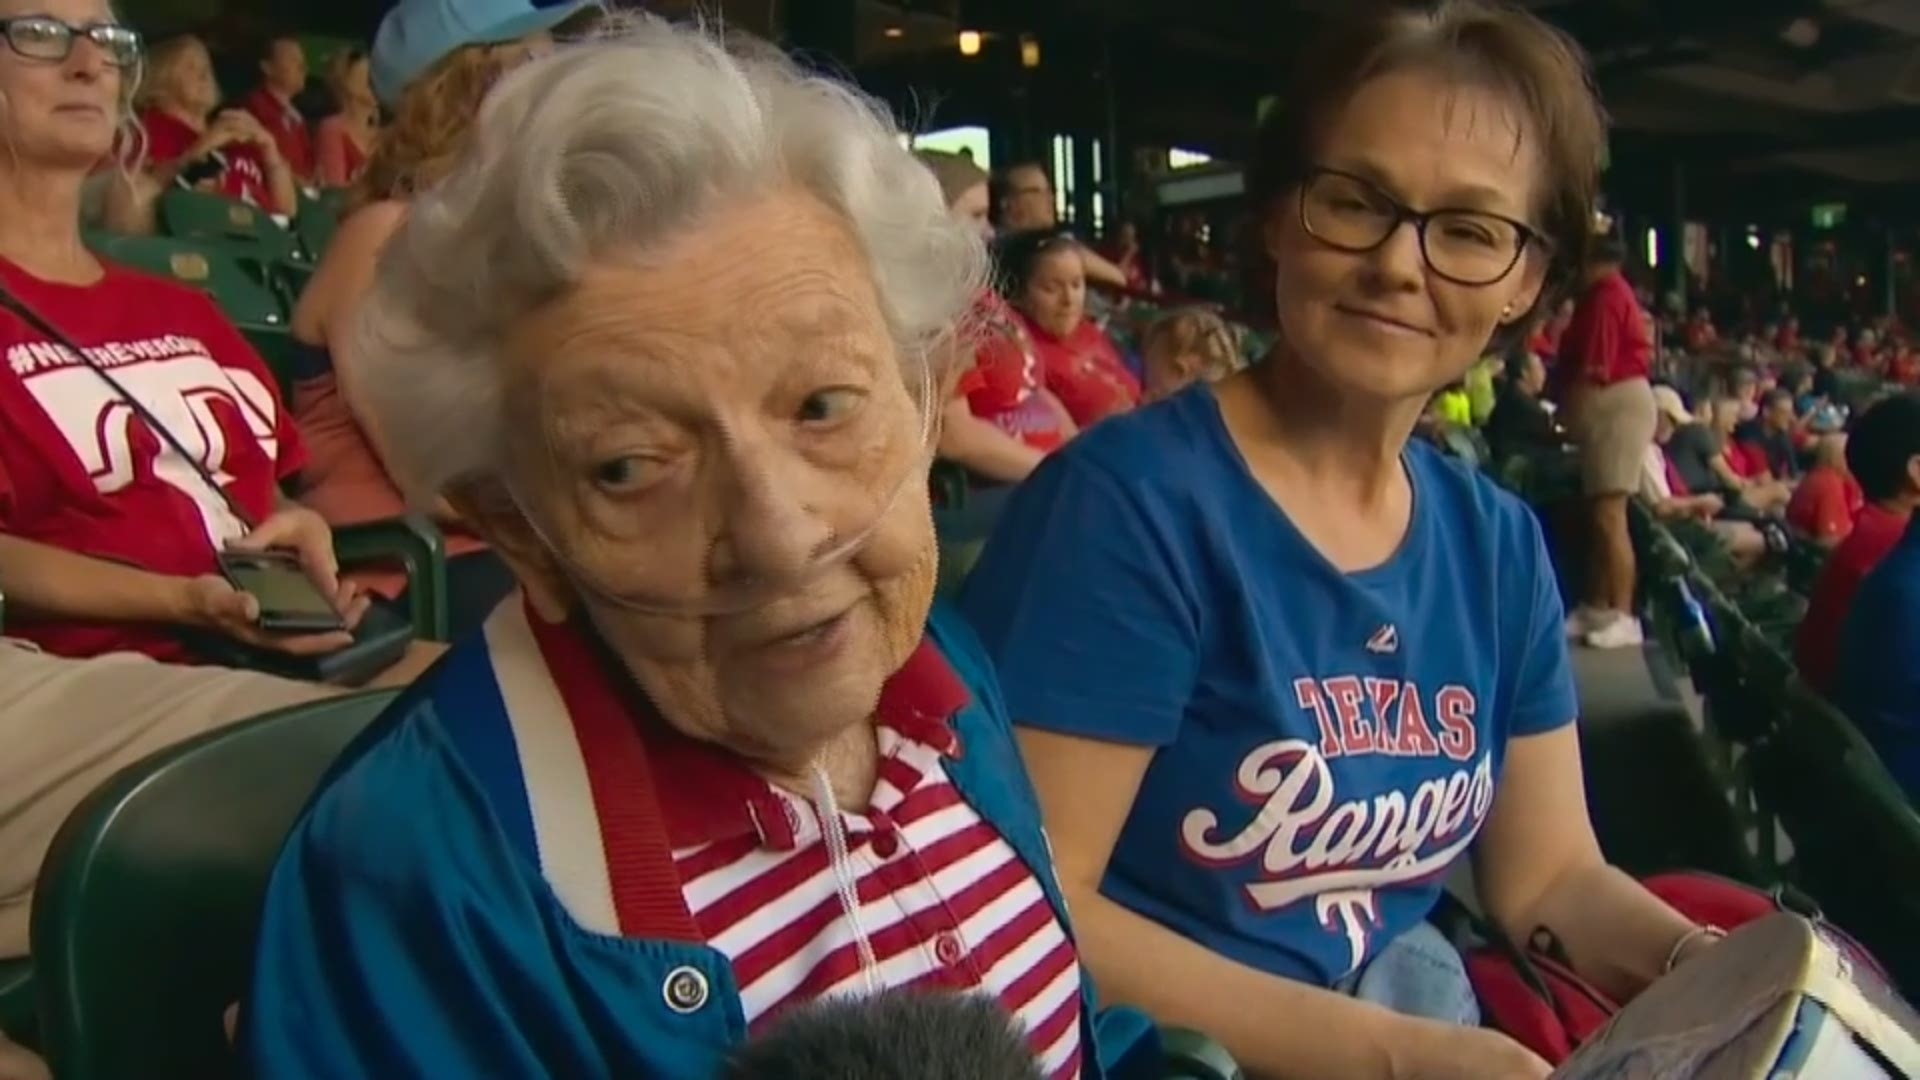 Sister Frances Evans, known as a passionate Rangers' fan and a mainstay at games, passed away Friday at the age of 90 in Fort Worth.  Her excitement for the team went all the way back to 1972.